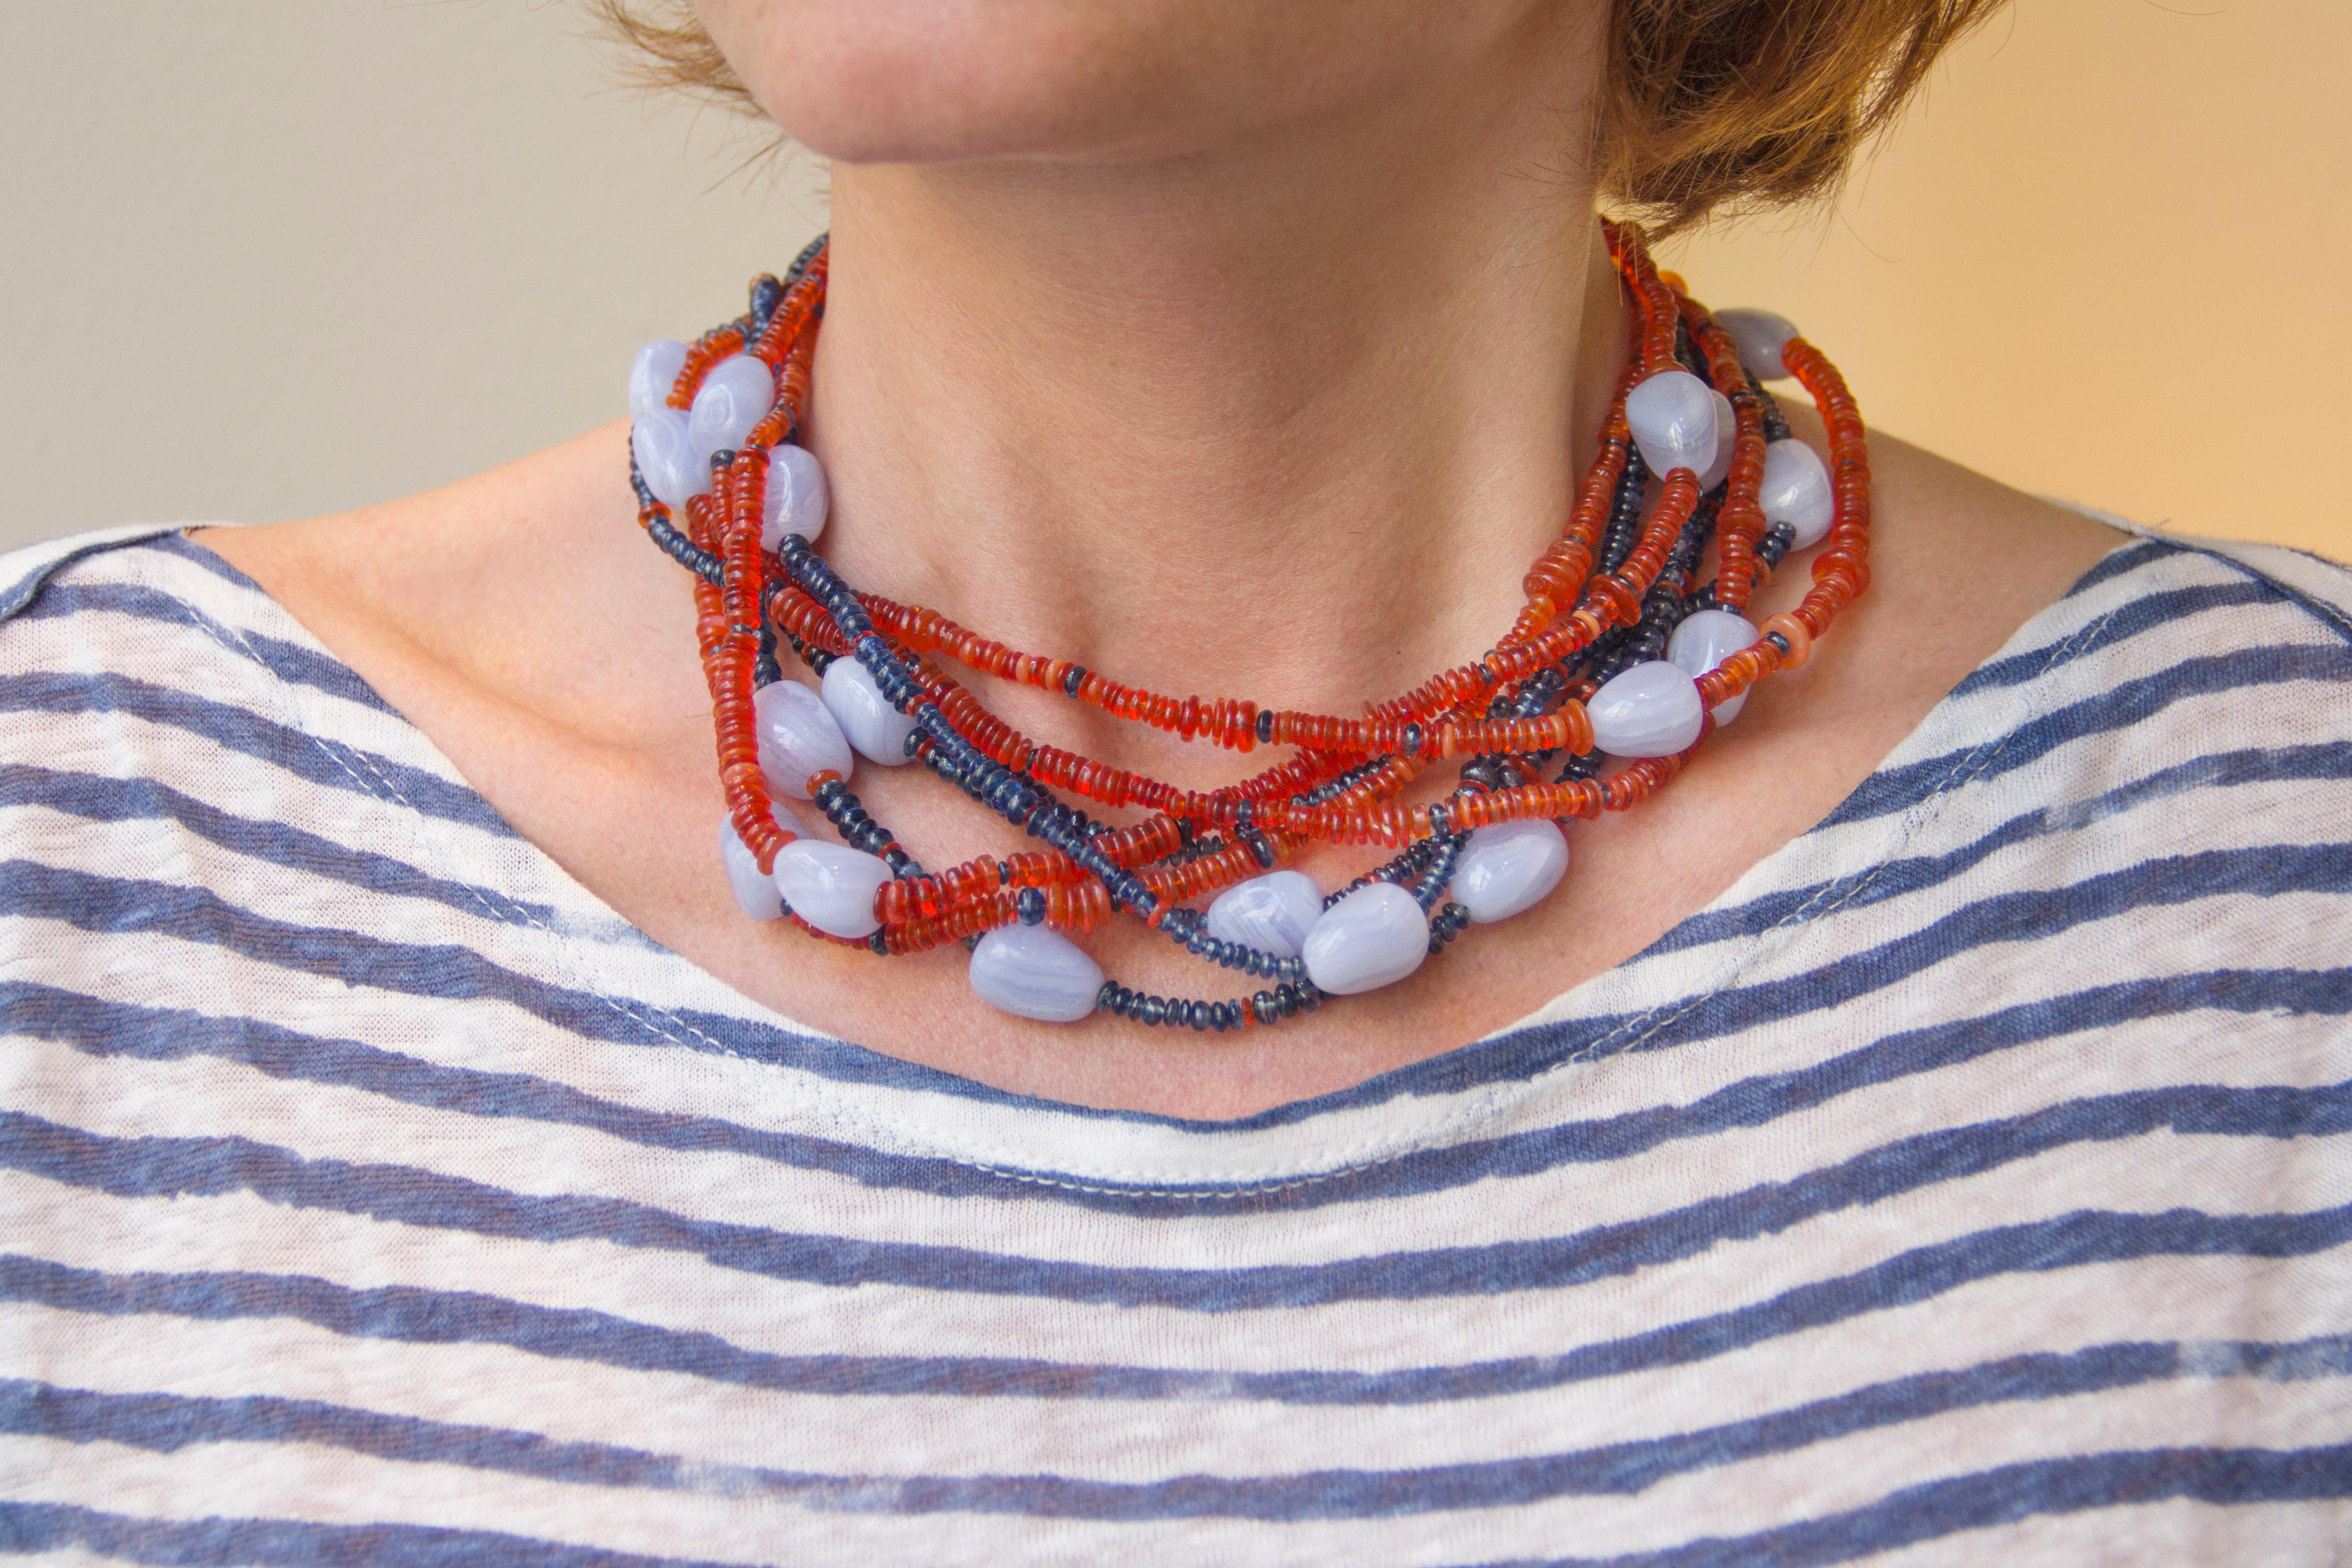 Alex Jona design collection, hand crafted in Italy, 18 karat yellow gold multi-strand necklace, featuring 191 carats of fire opal, 230 carats of kyanite and 25 pieces of chalcedony.

Alex Jona jewels stand out, not only for their special design and